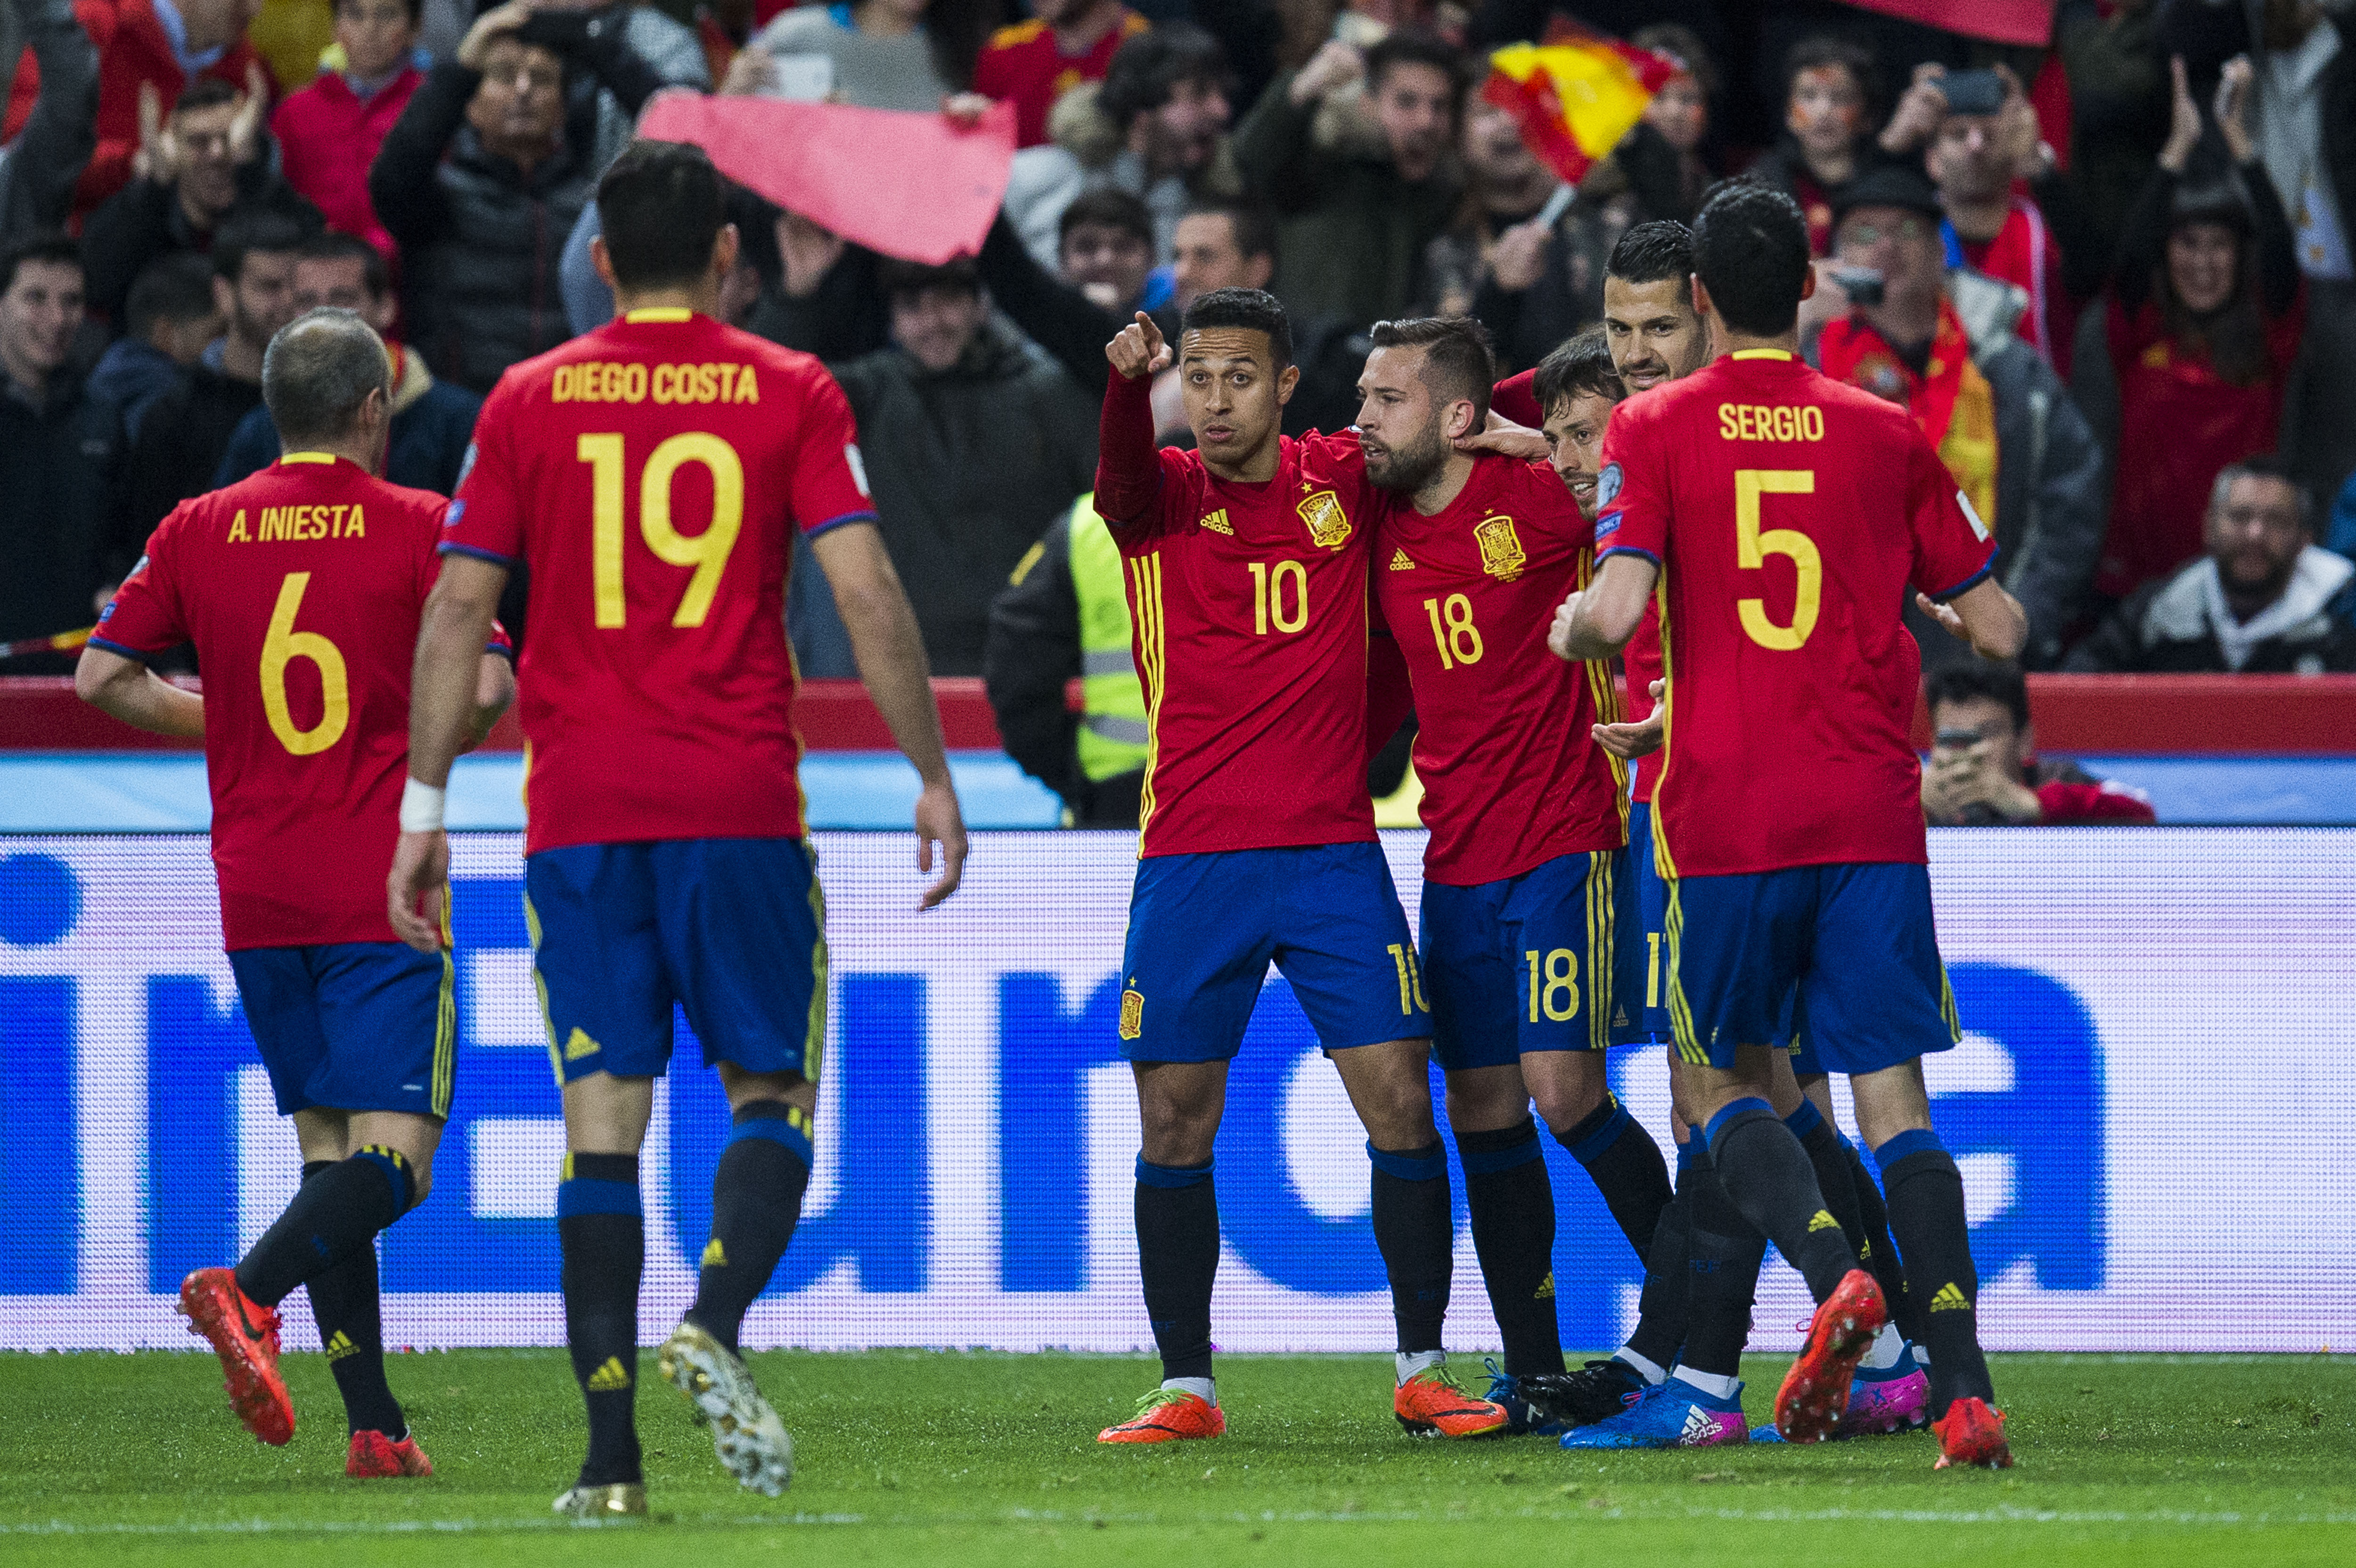 GIJON, SPAIN - MARCH 24:  David Silva of Spain celebrates after scoring goal during the FIFA 2018 World Cup Qualifier between Spain and Israel at Estadio El Molinon on March 24, 2017 in Gijon, Spain.  (Photo by Juan Manuel Serrano Arce/Getty Images)